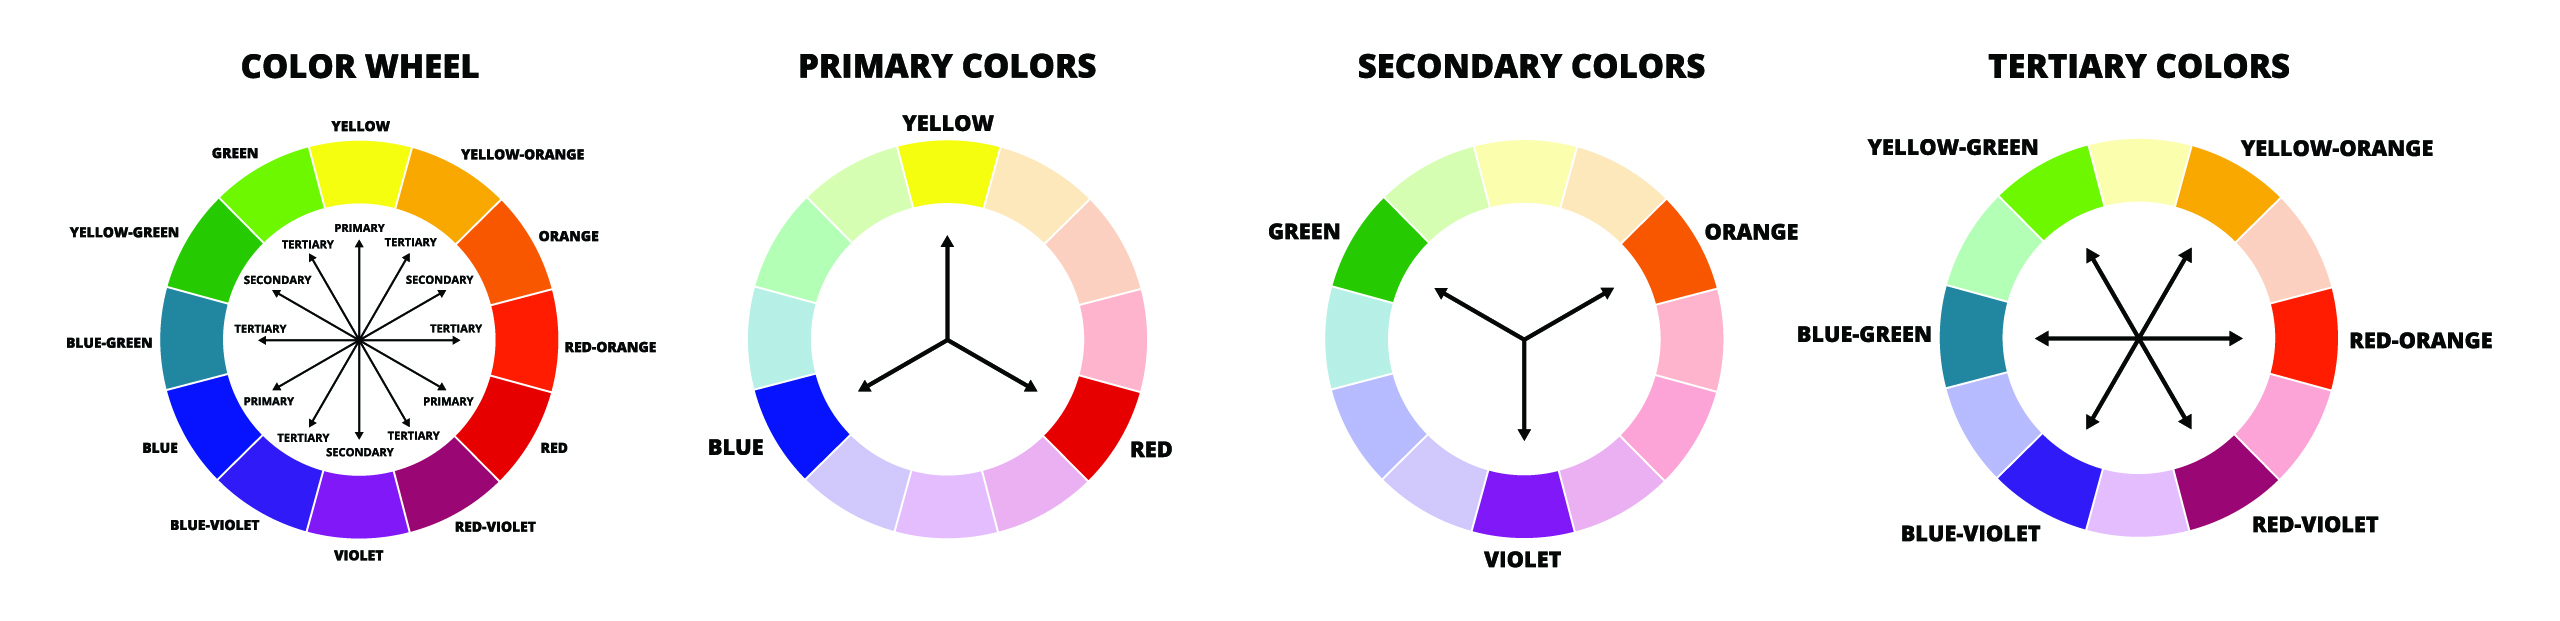 The differences among tertiary, secondary, and primary colors